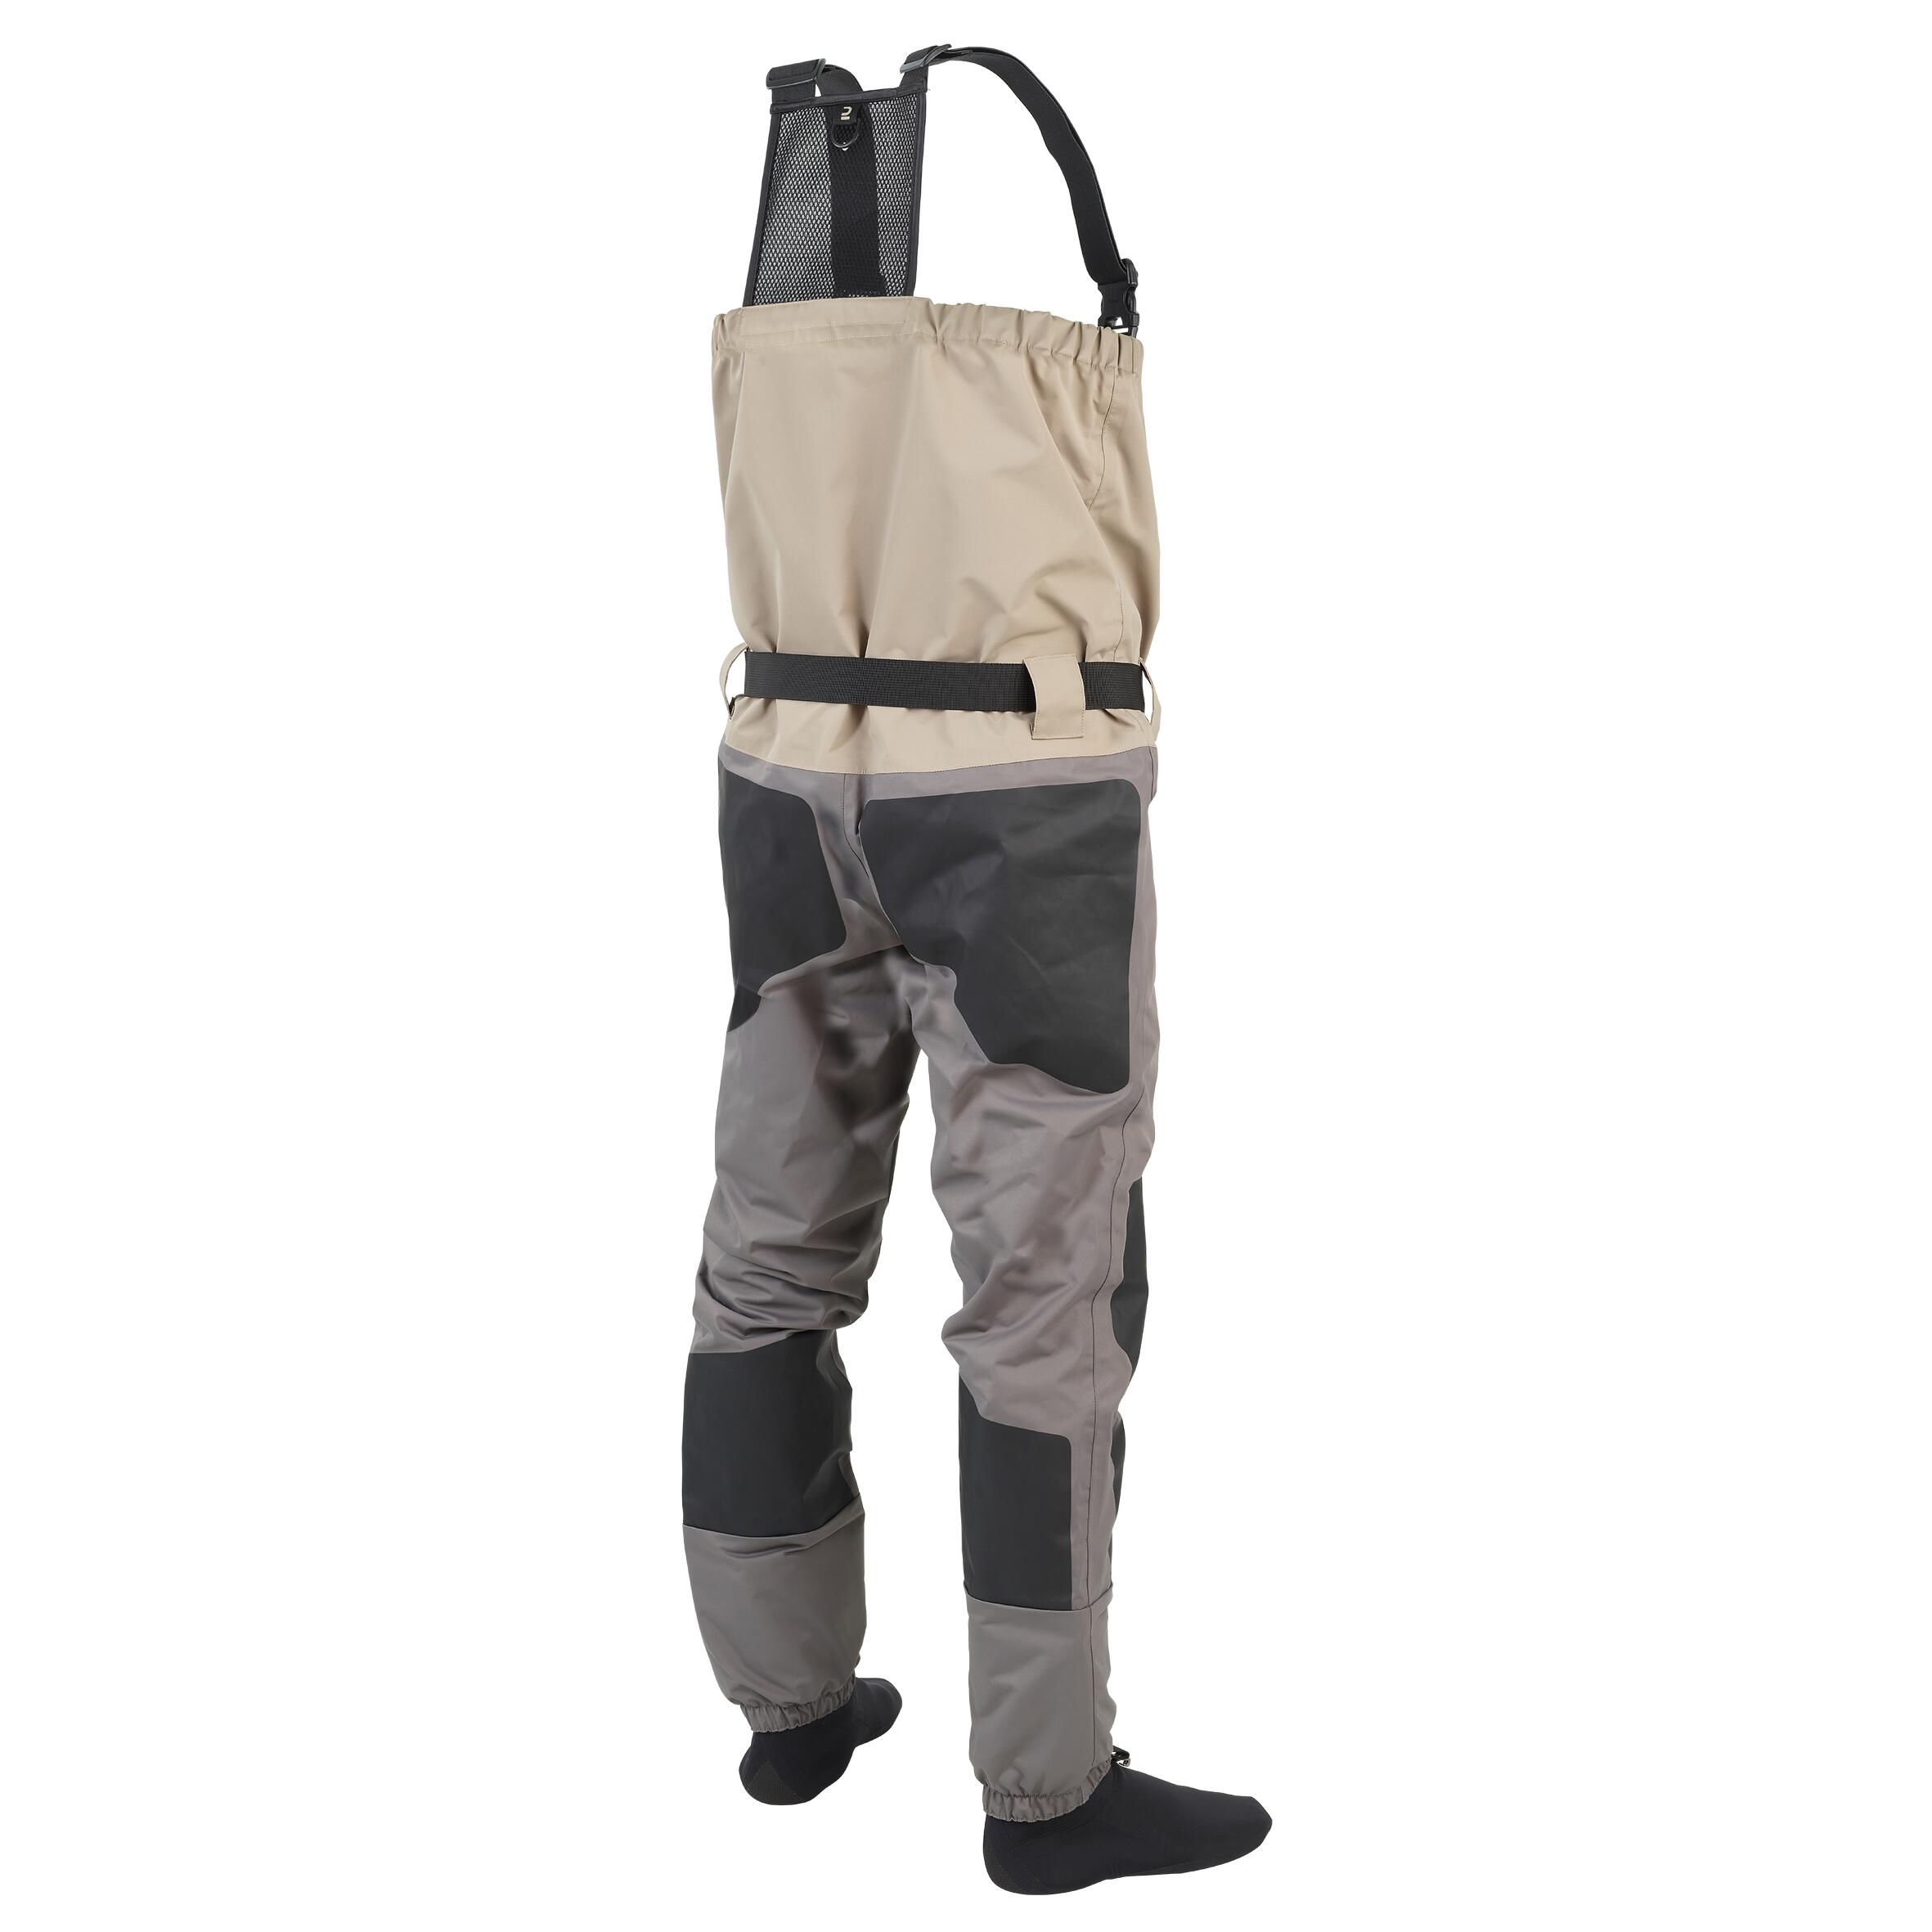 Fishing breathable waders with neoprene booties - WDS 500 BR-S 10/10